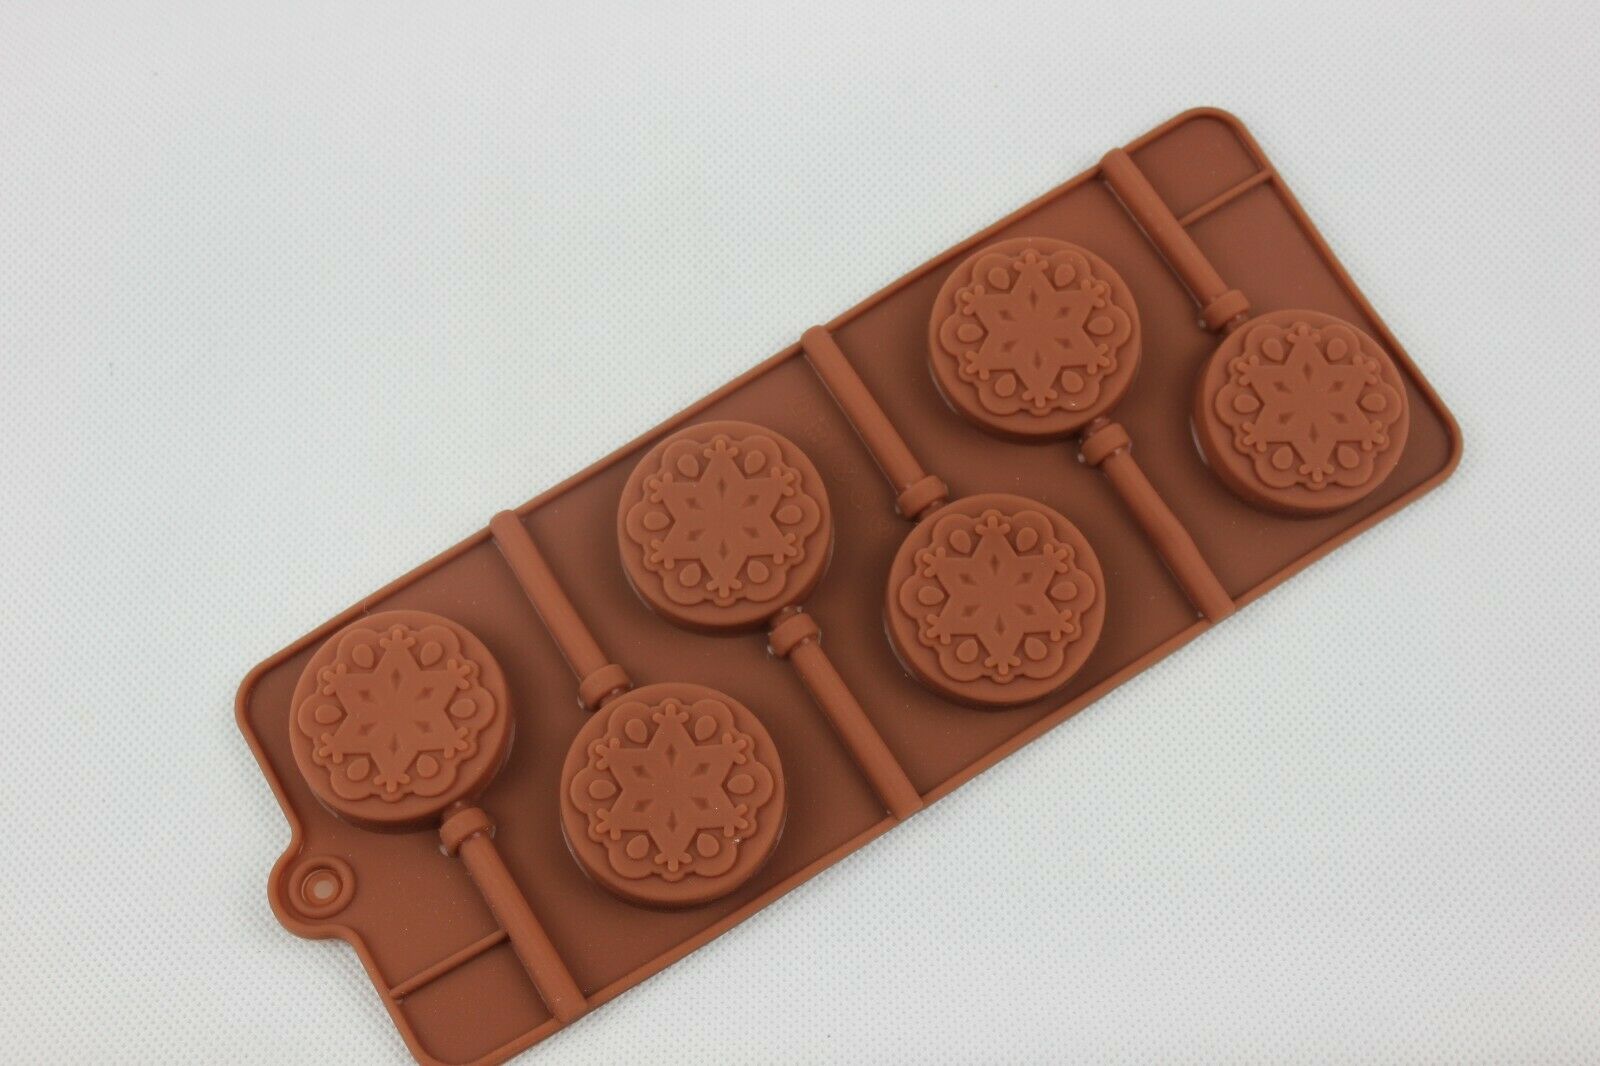 ROUND STAR SHAPE SILICONE CHOCOLATE LOLLIPOP MOULD WITH STICKS